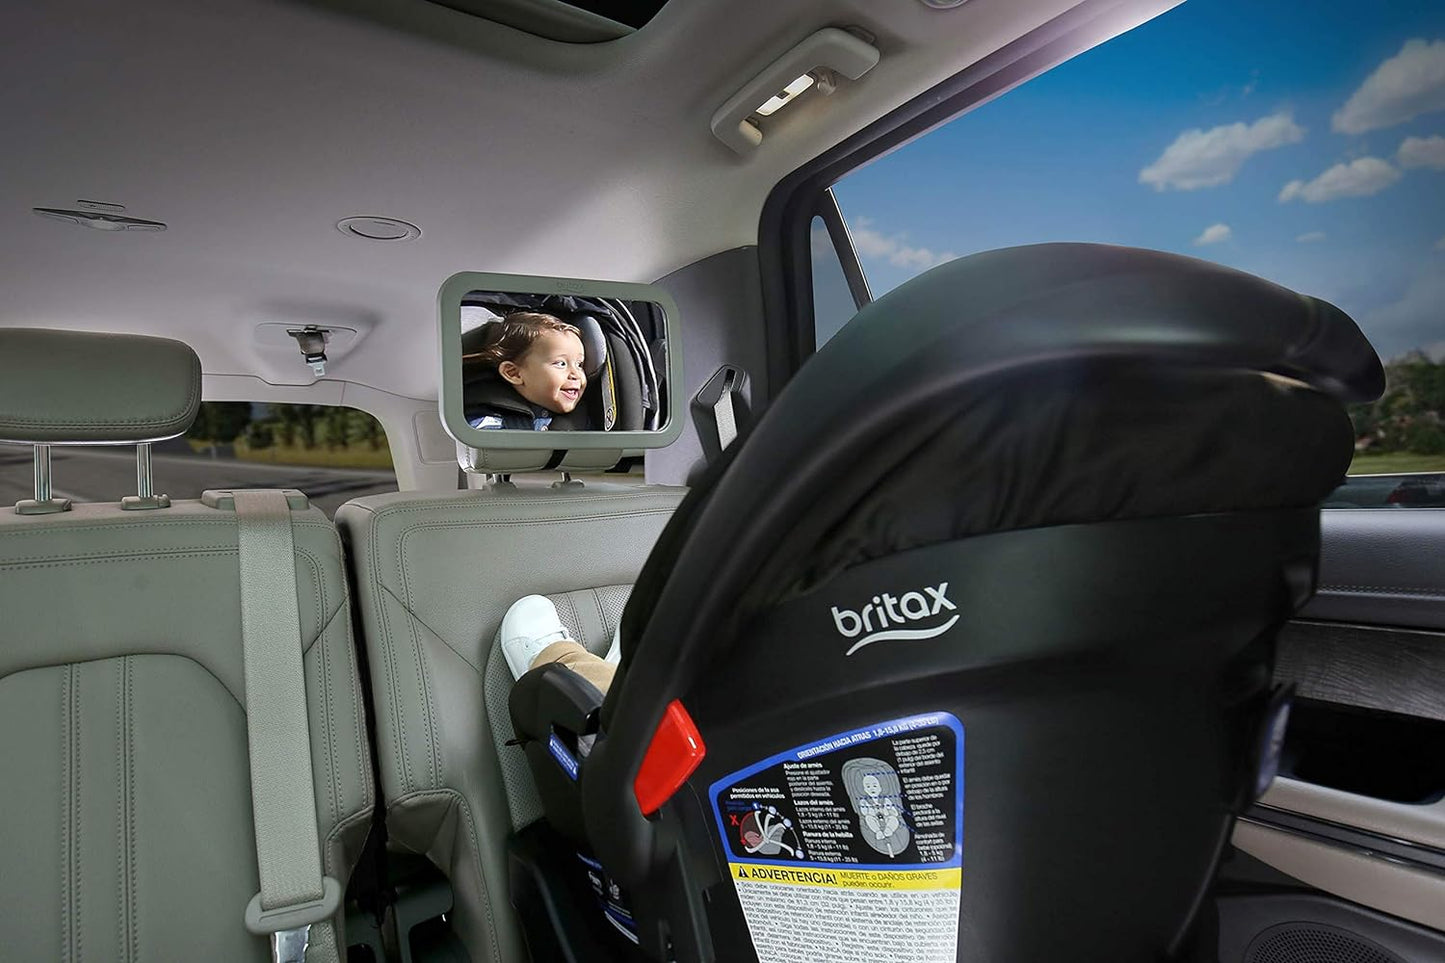 Britax Baby Car Mirror for Back Seat - XL Clear View - Easily Adjusts - Crash Tested - Shatterproof